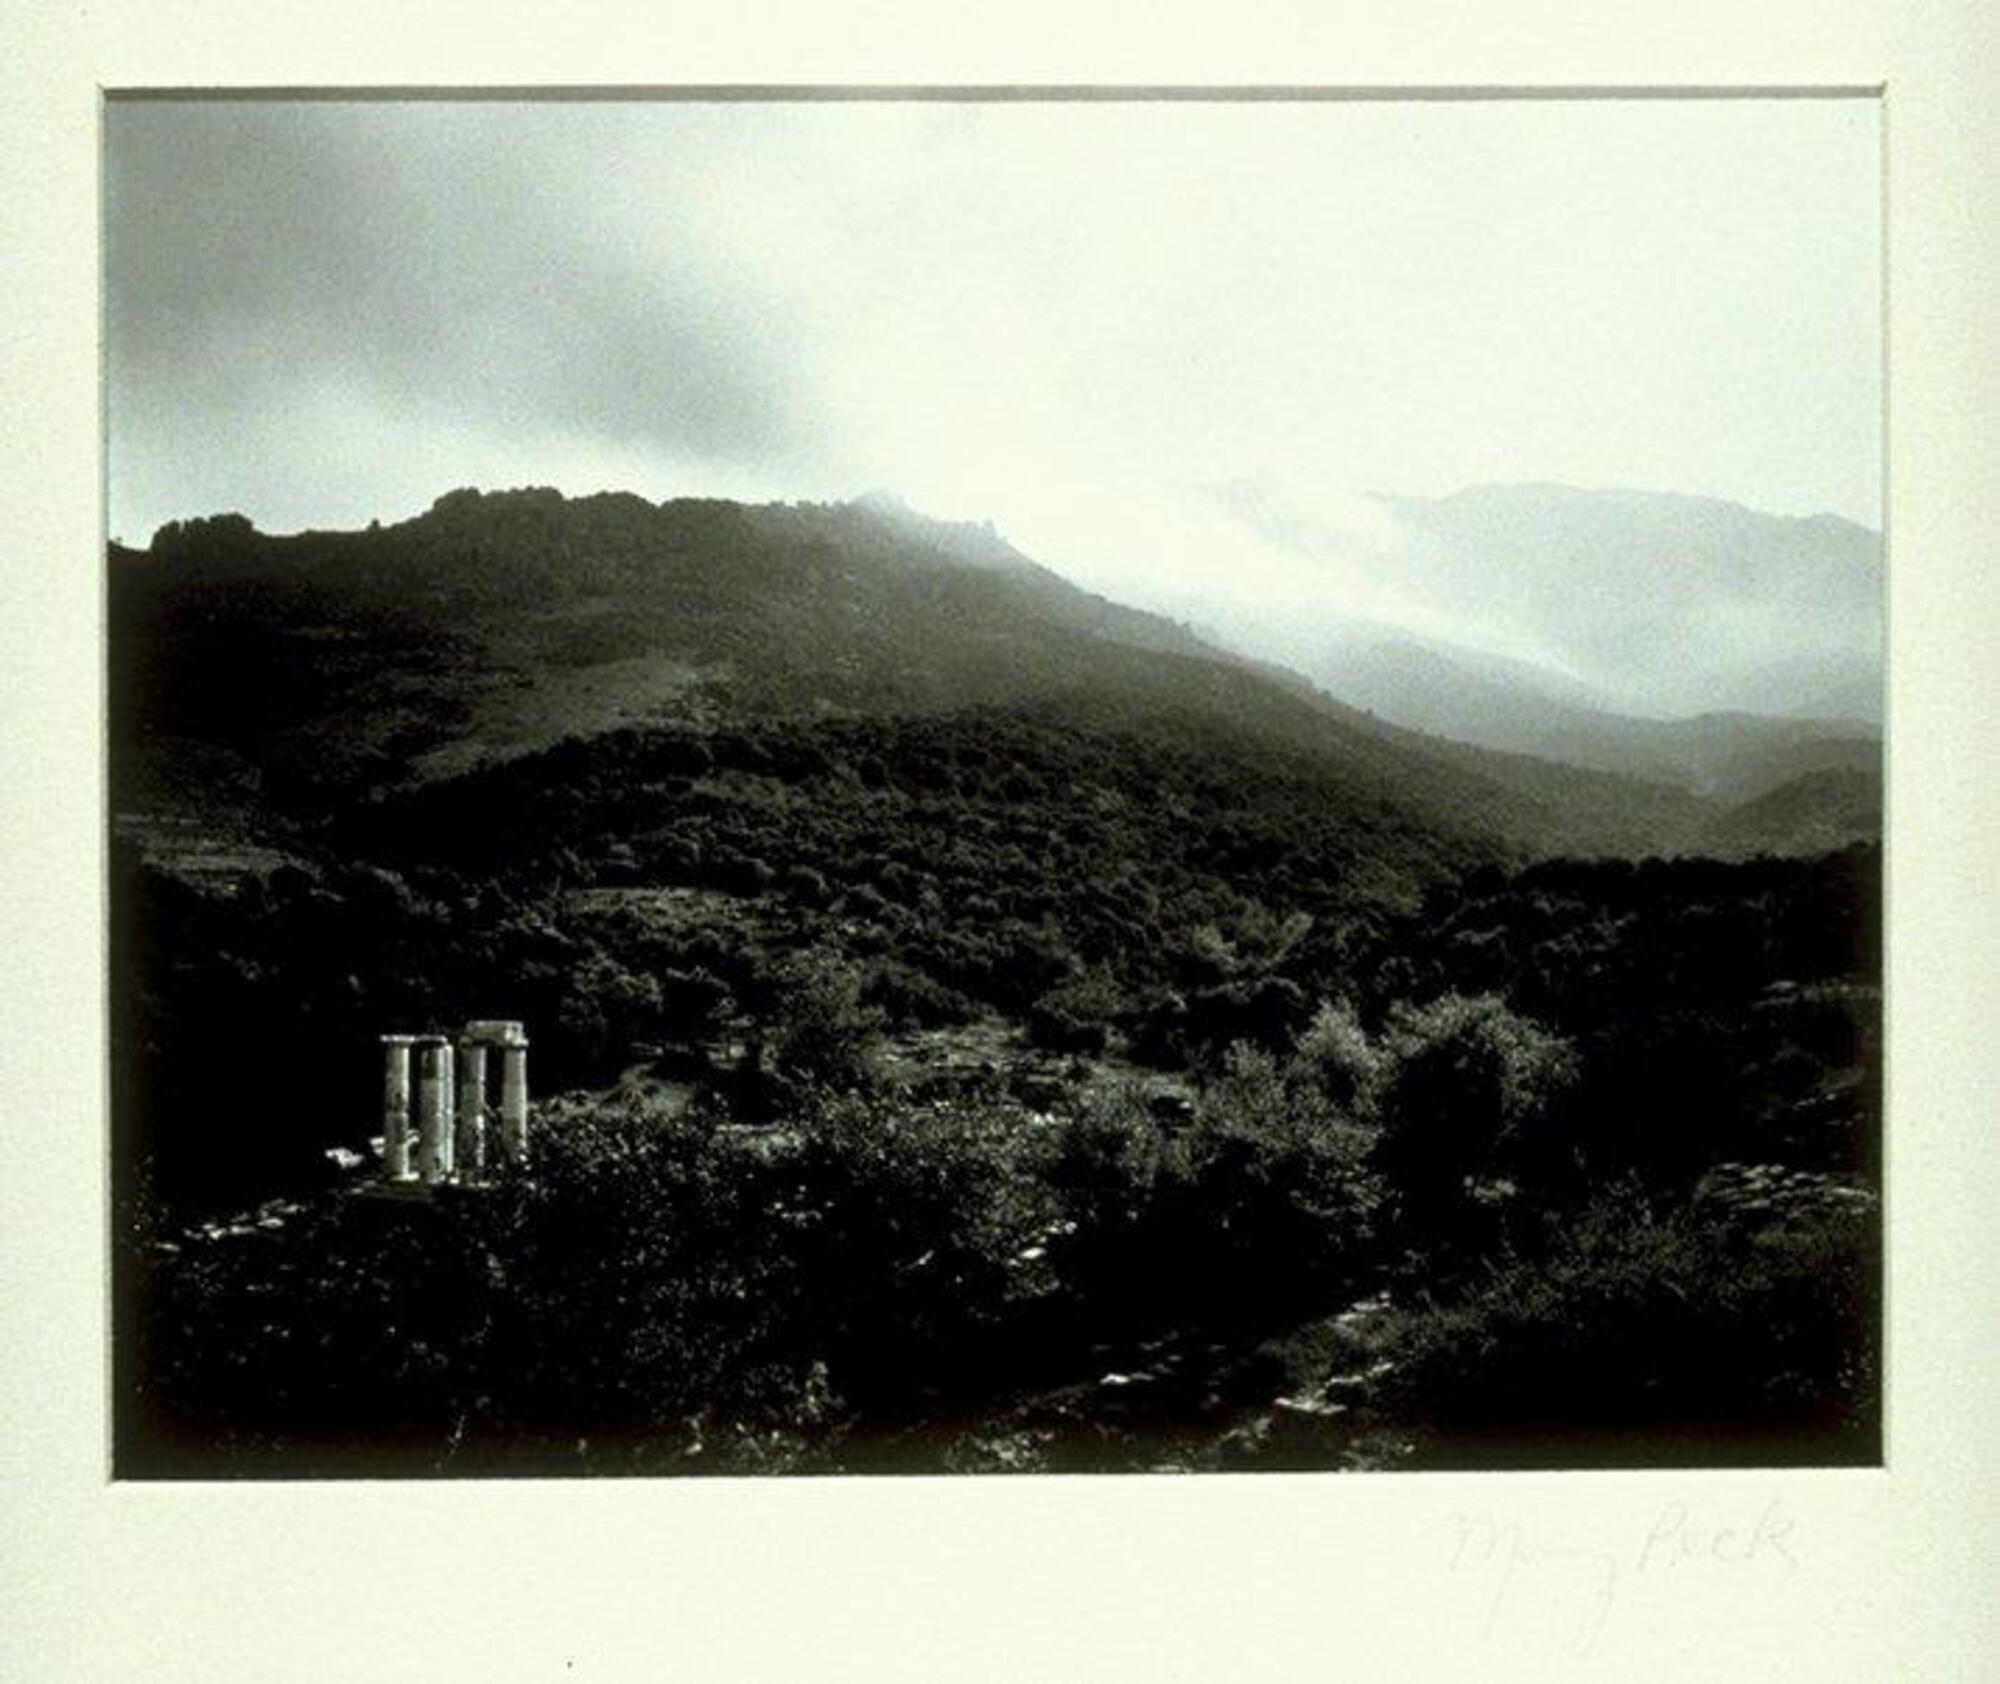 This photograph depicts a temple in the lower left of rolling hills set in a rocky landscape. Clouds sweep over the mountains in the background.